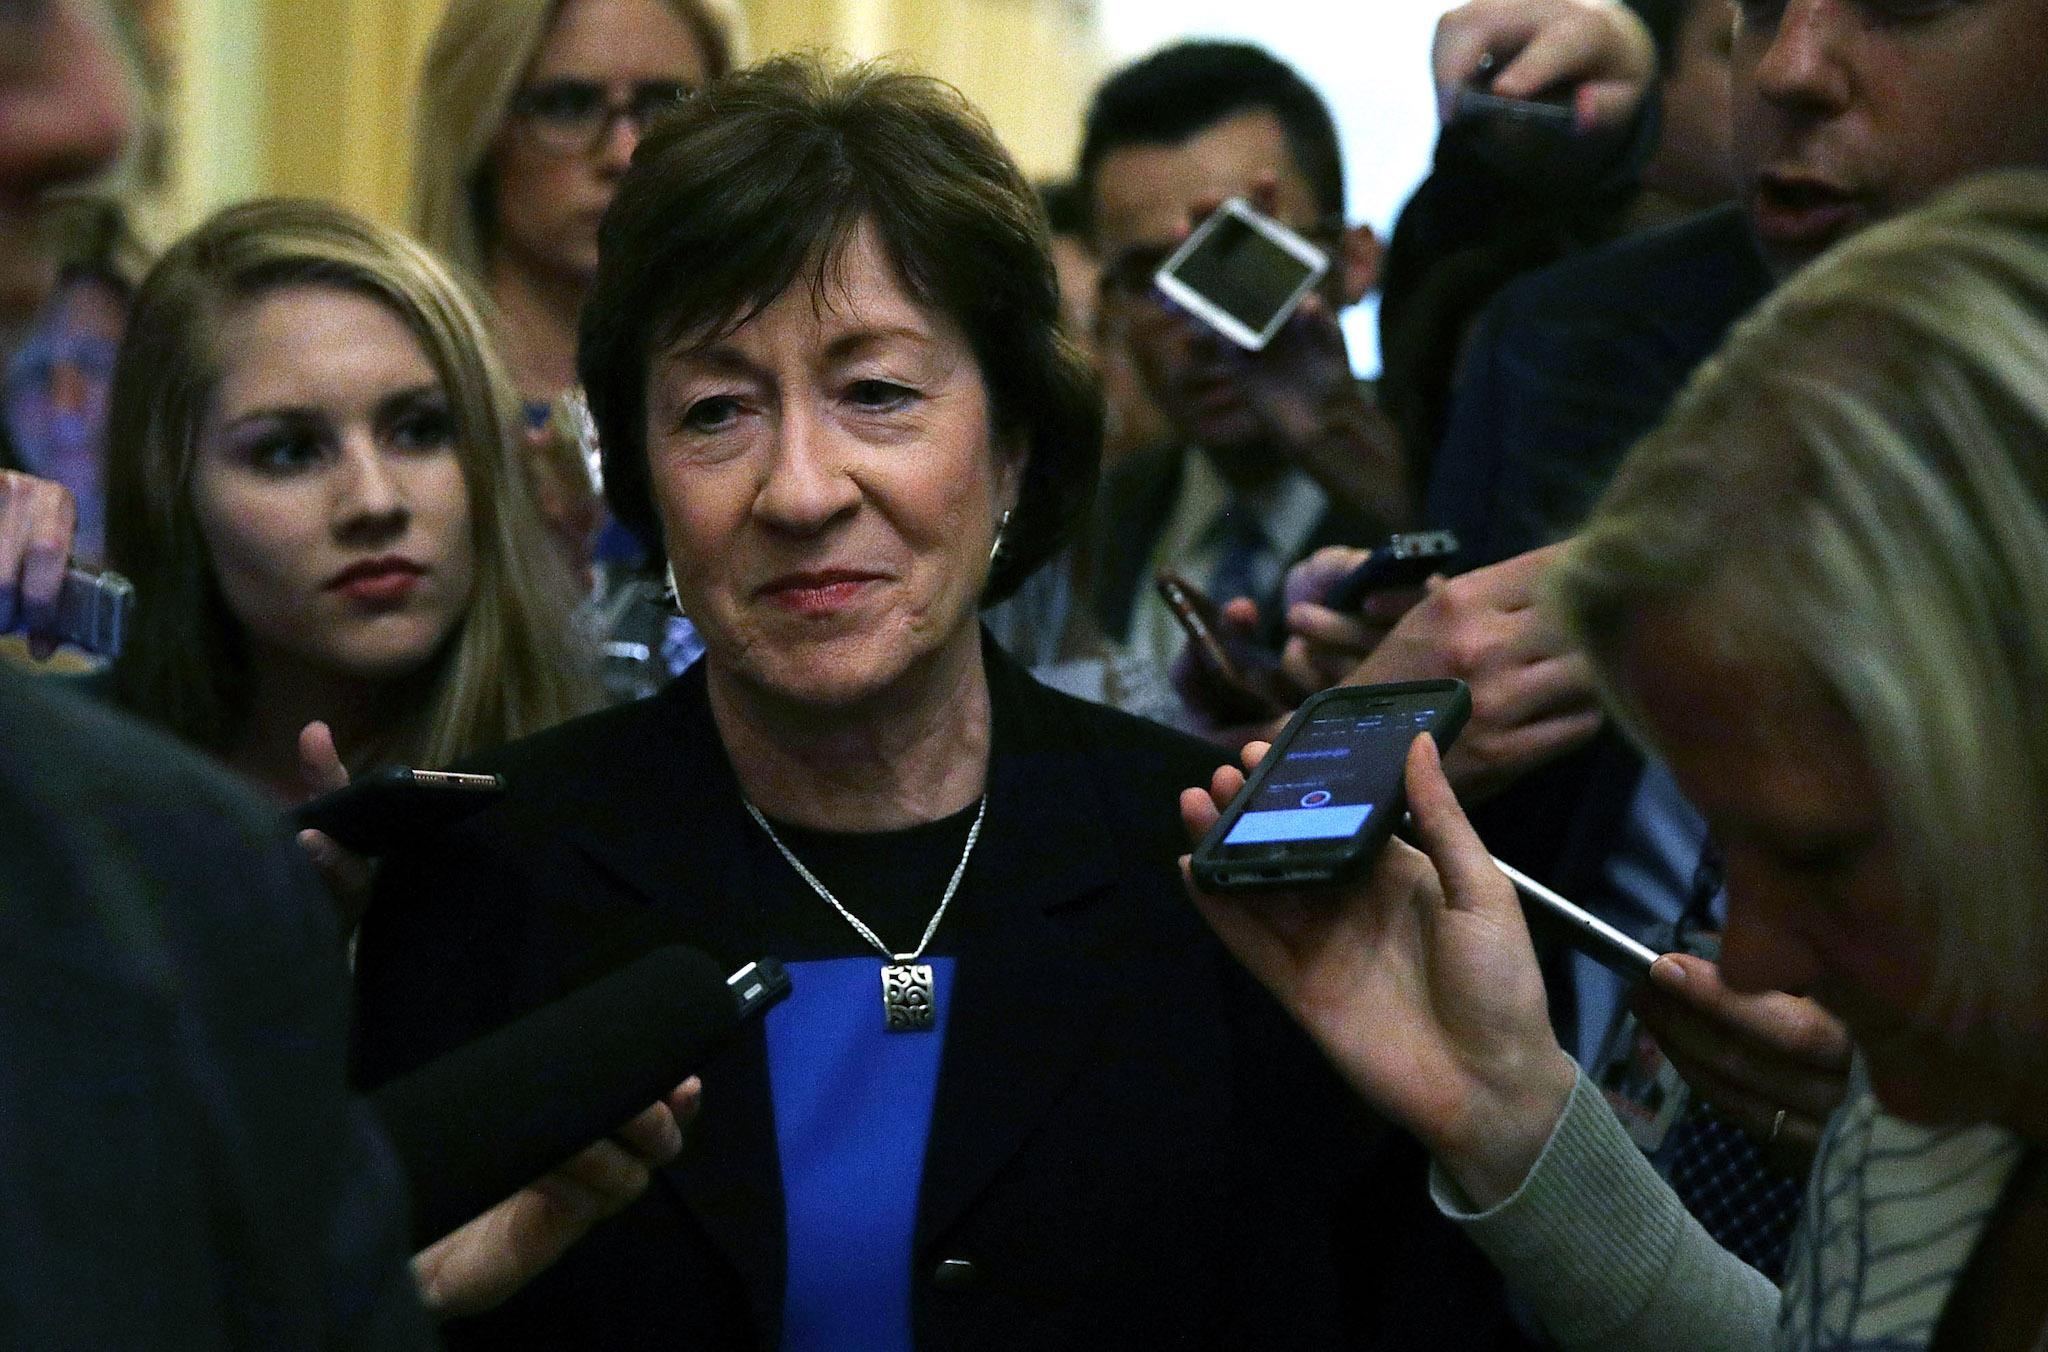 Republican Senator Susan Collins is surrounded by members of the media